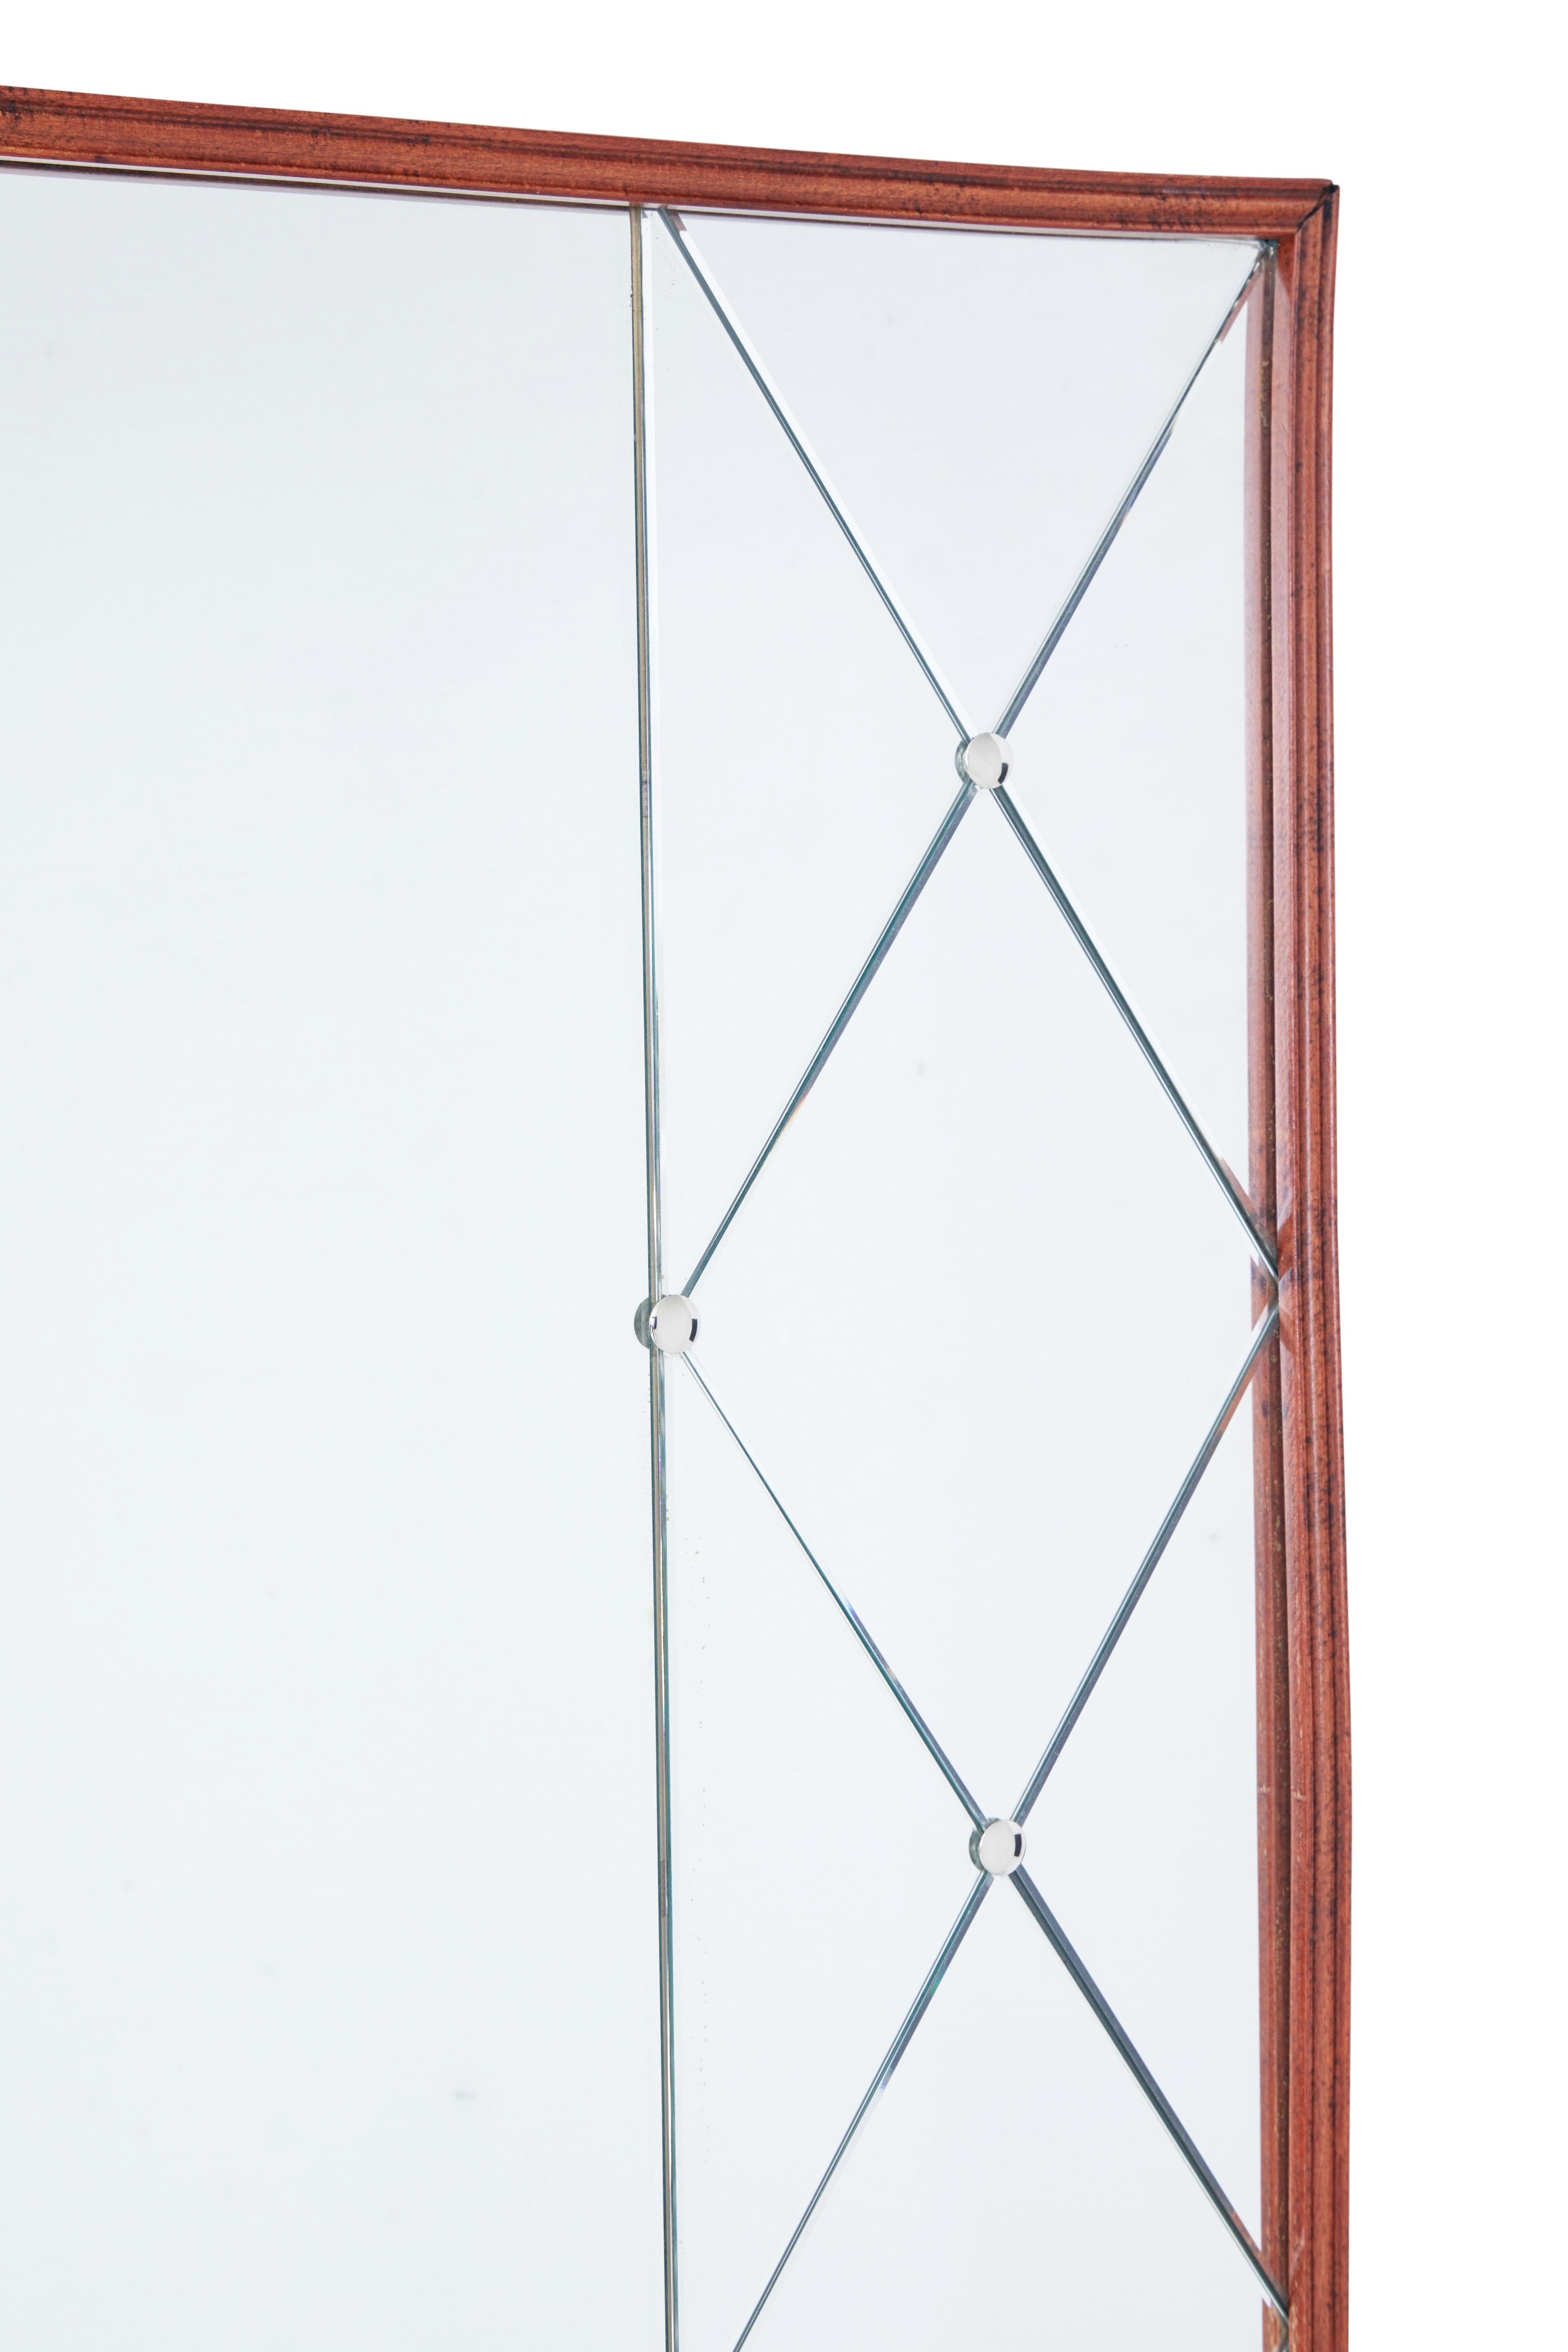 Unusual shaped deco style mirror, circa 1950.

Slight concave shaped teak frame. Central mirrored panel flanked either side with latice mirrored panels. Held in place by screw in steel studs.